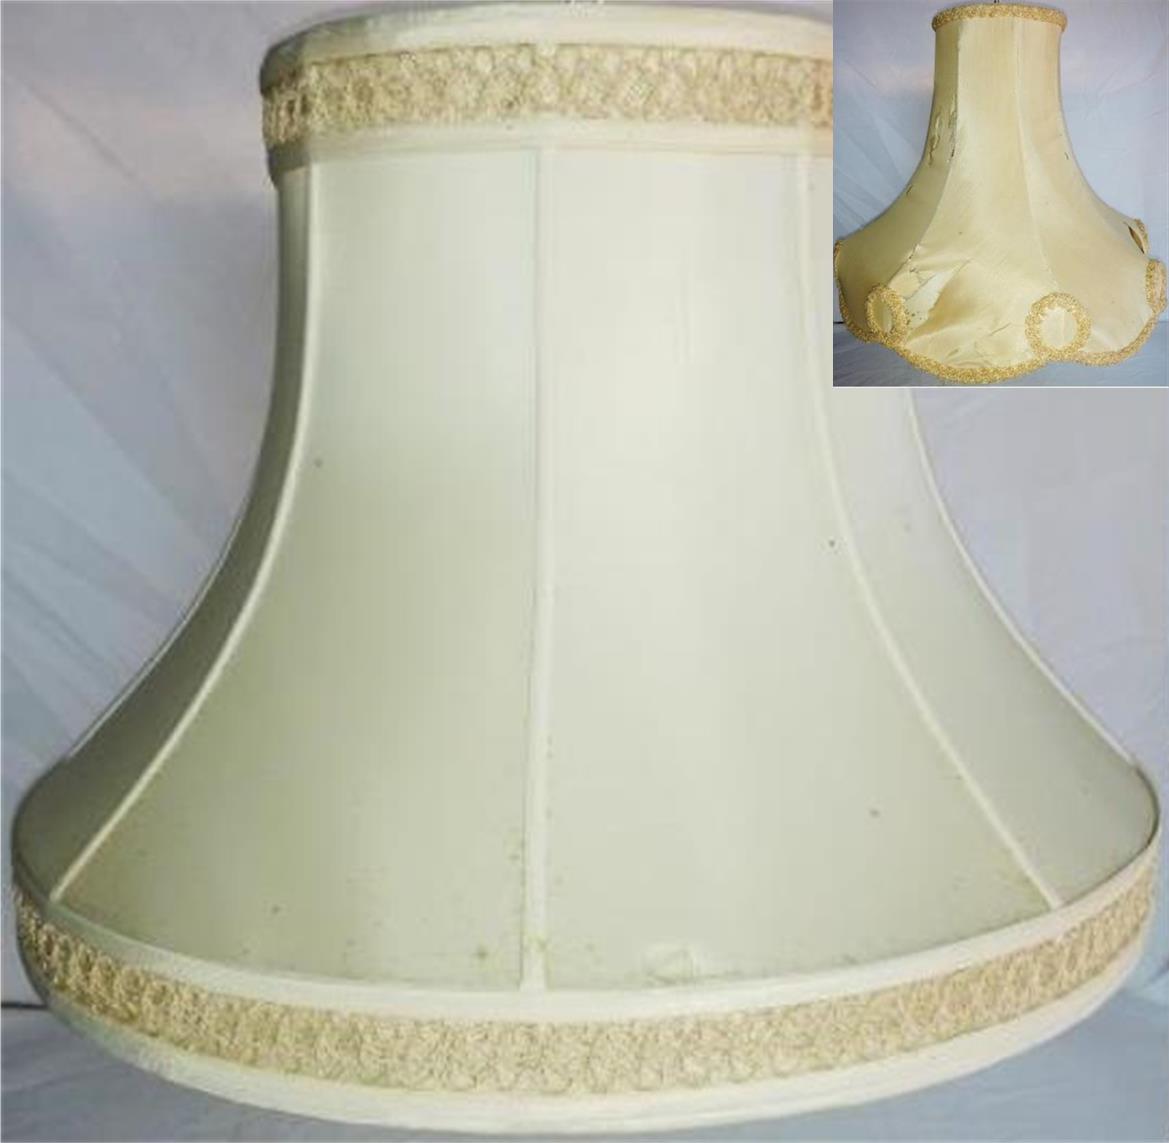 Silk Lamp Shades Recover Projects